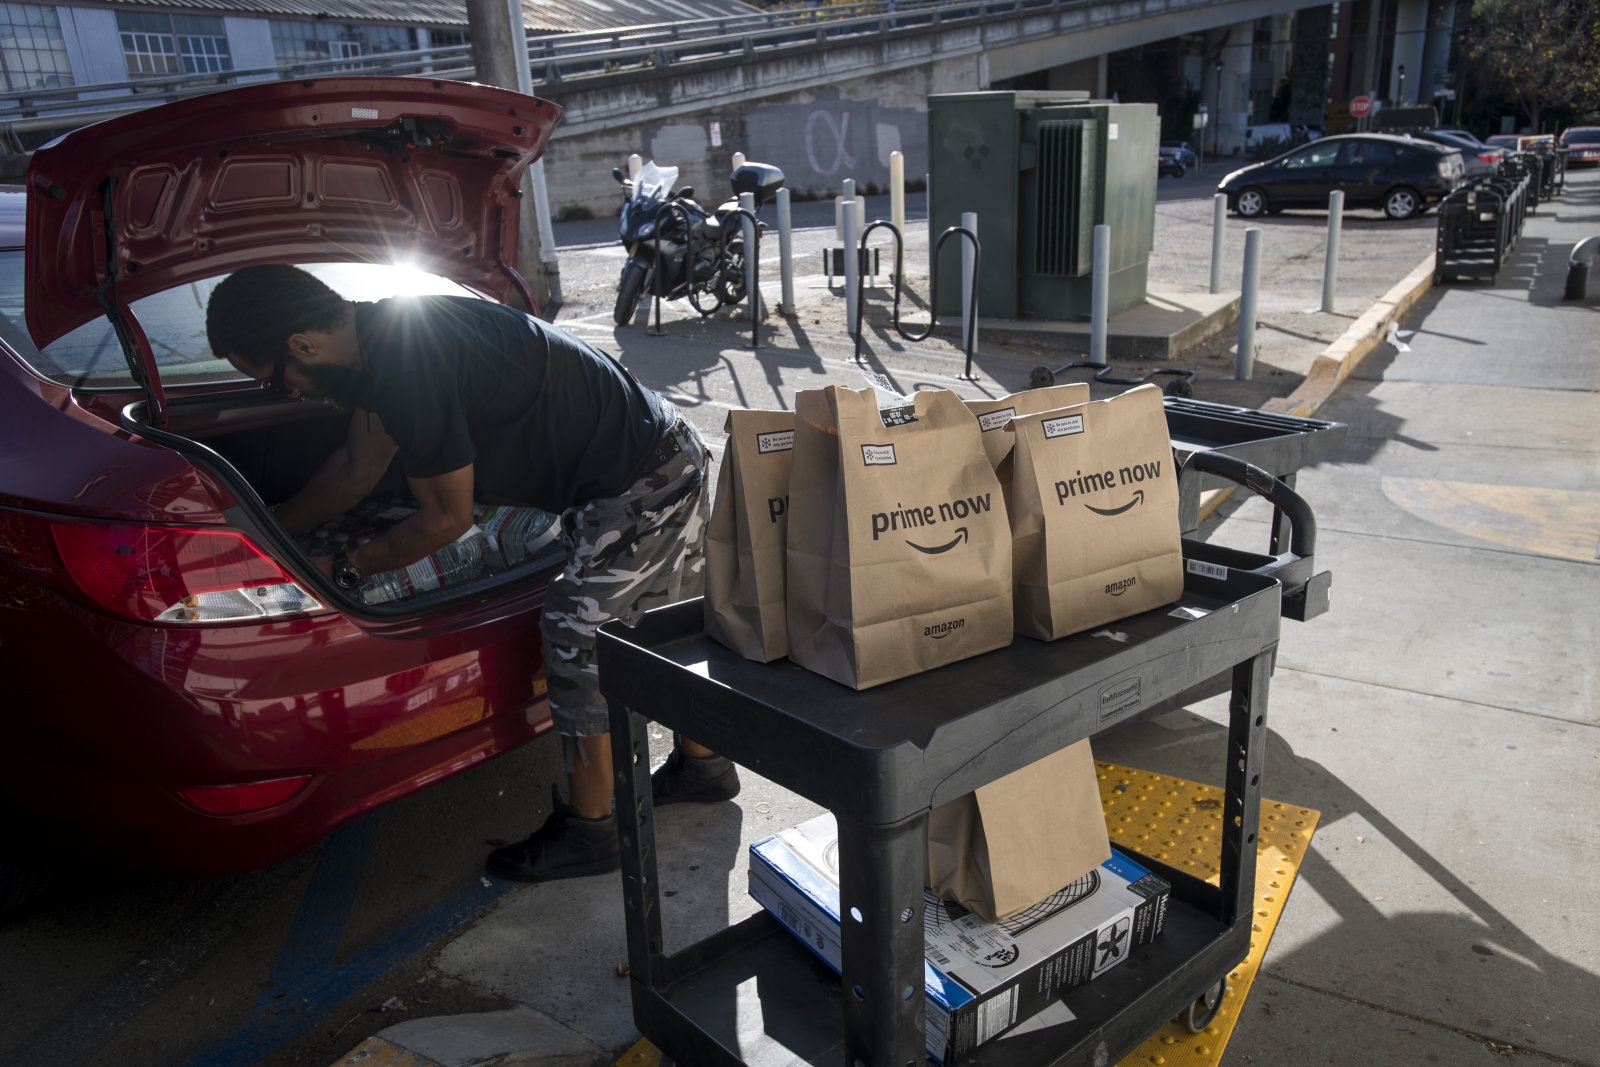 Amazon asks delivery drivers to verify their identities with selfies | DeviceDaily.com